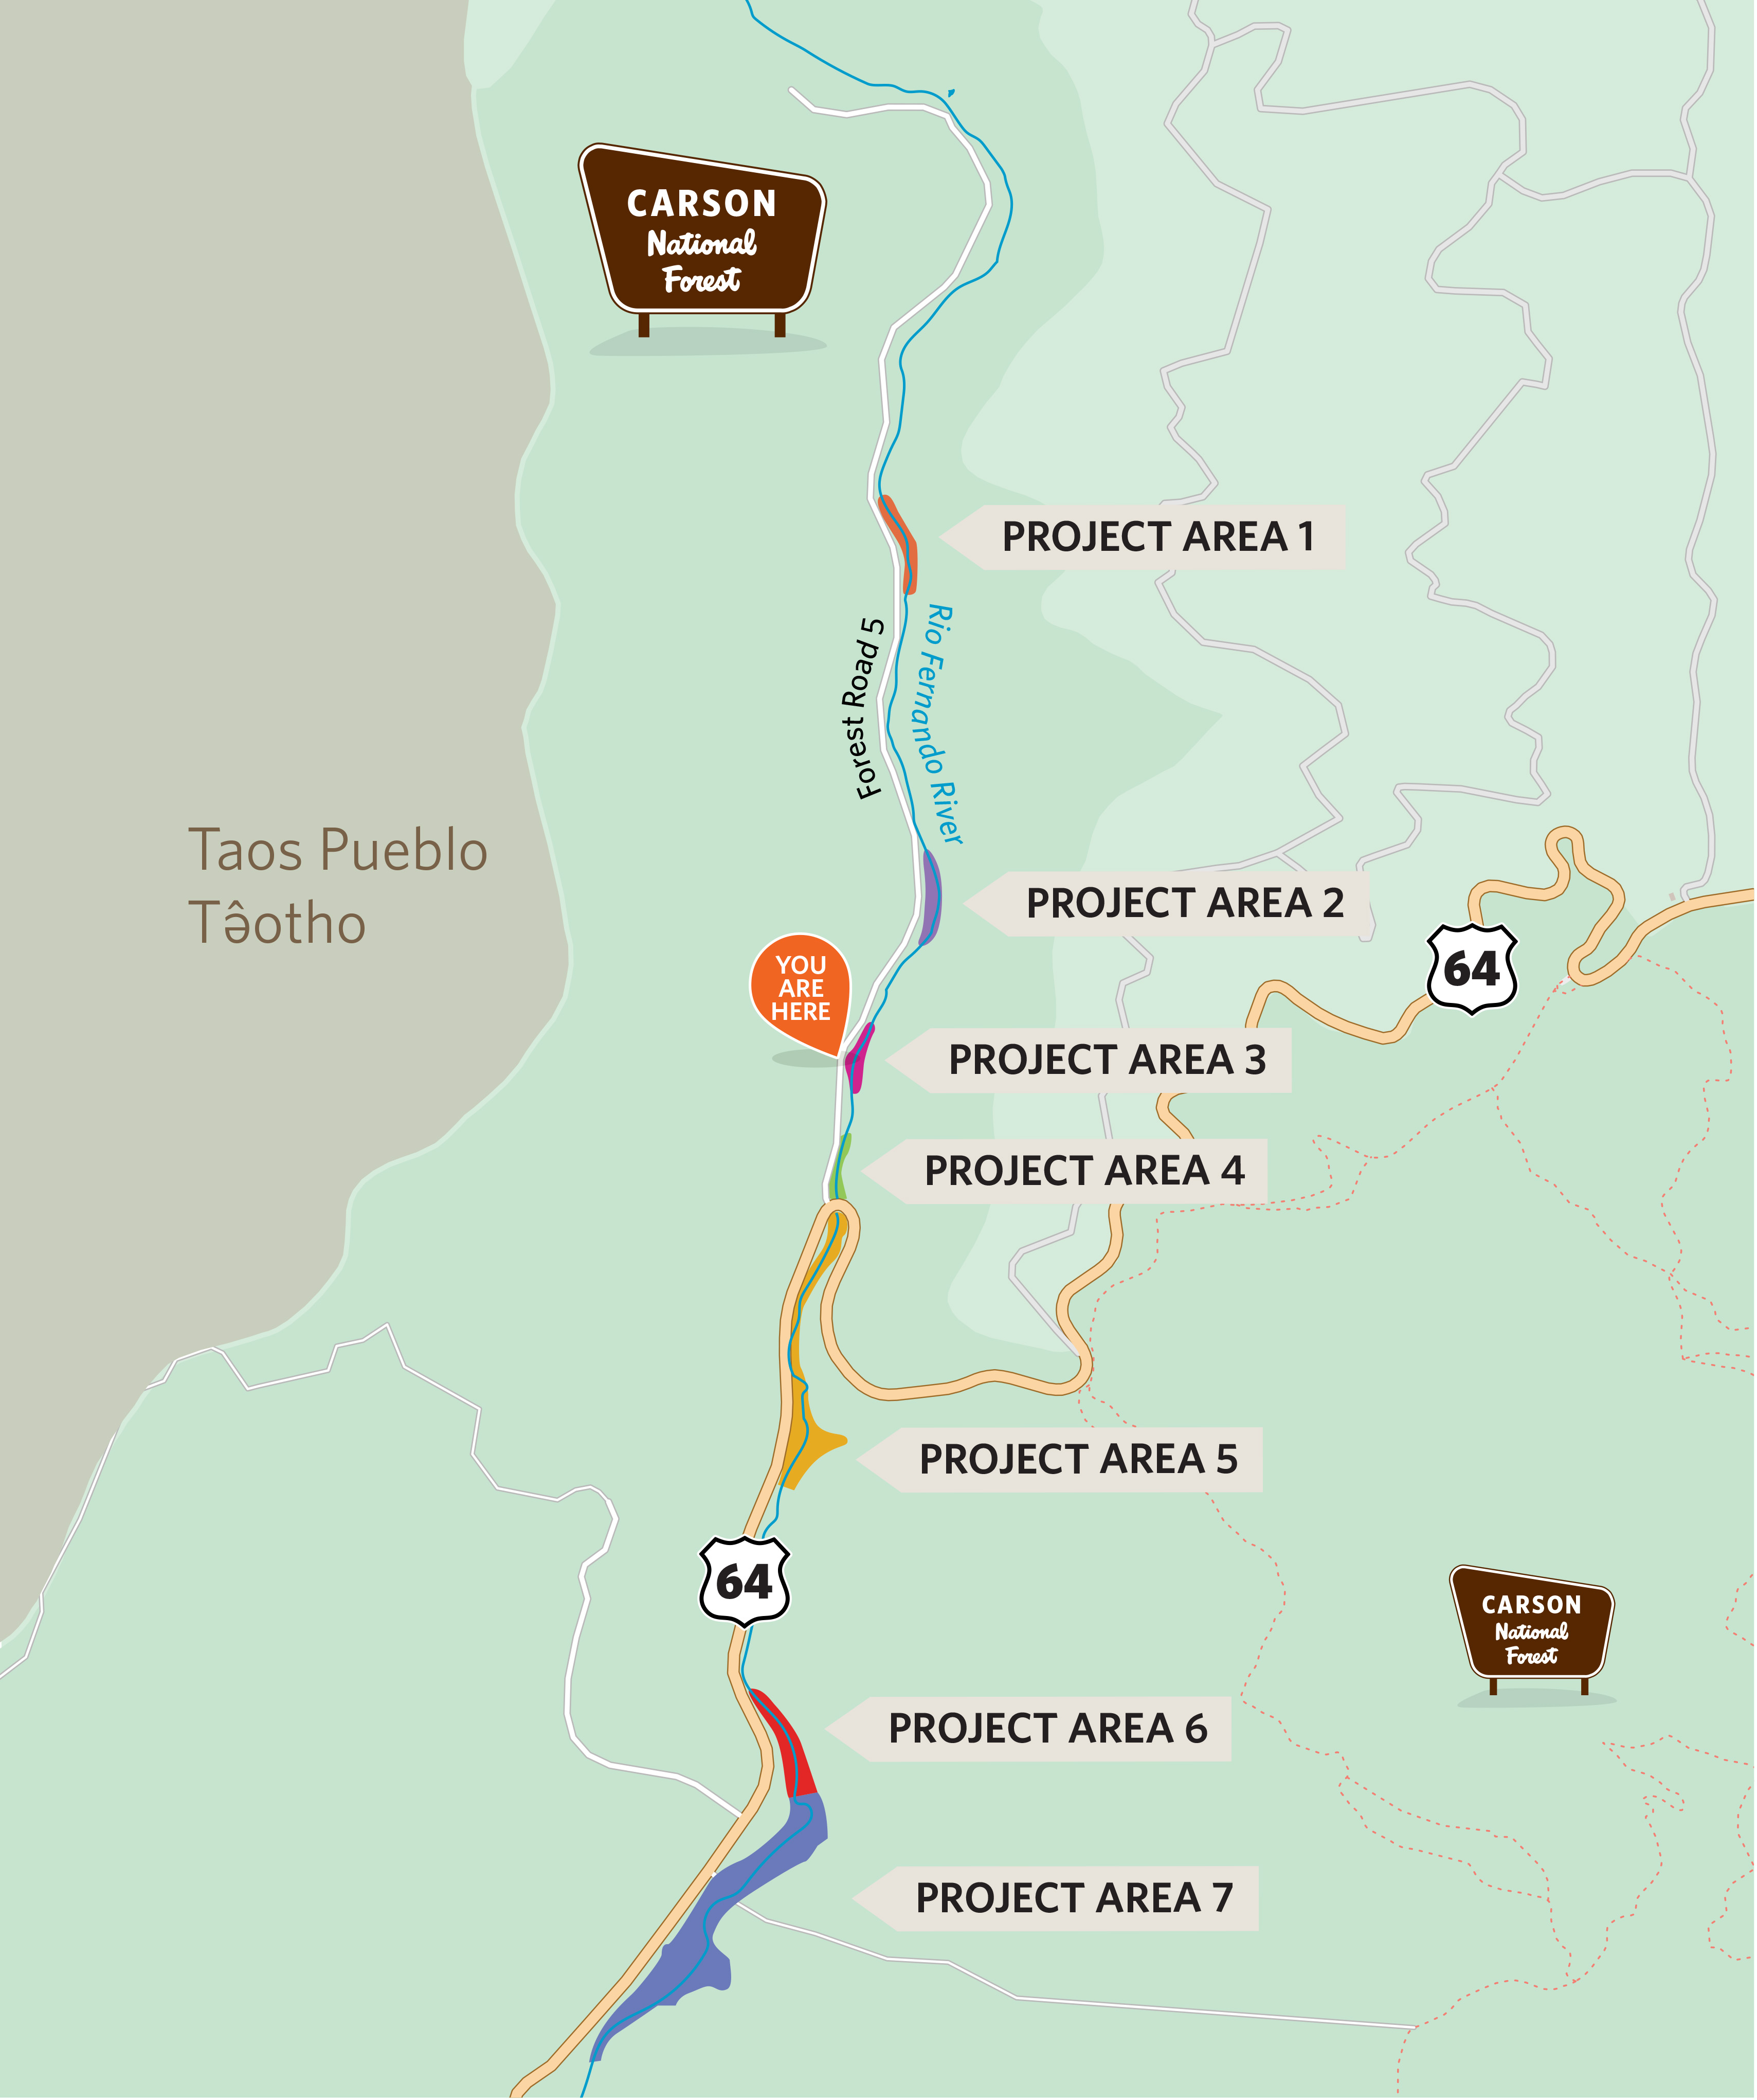 Map of the project areas of the La Jara Restoration project.